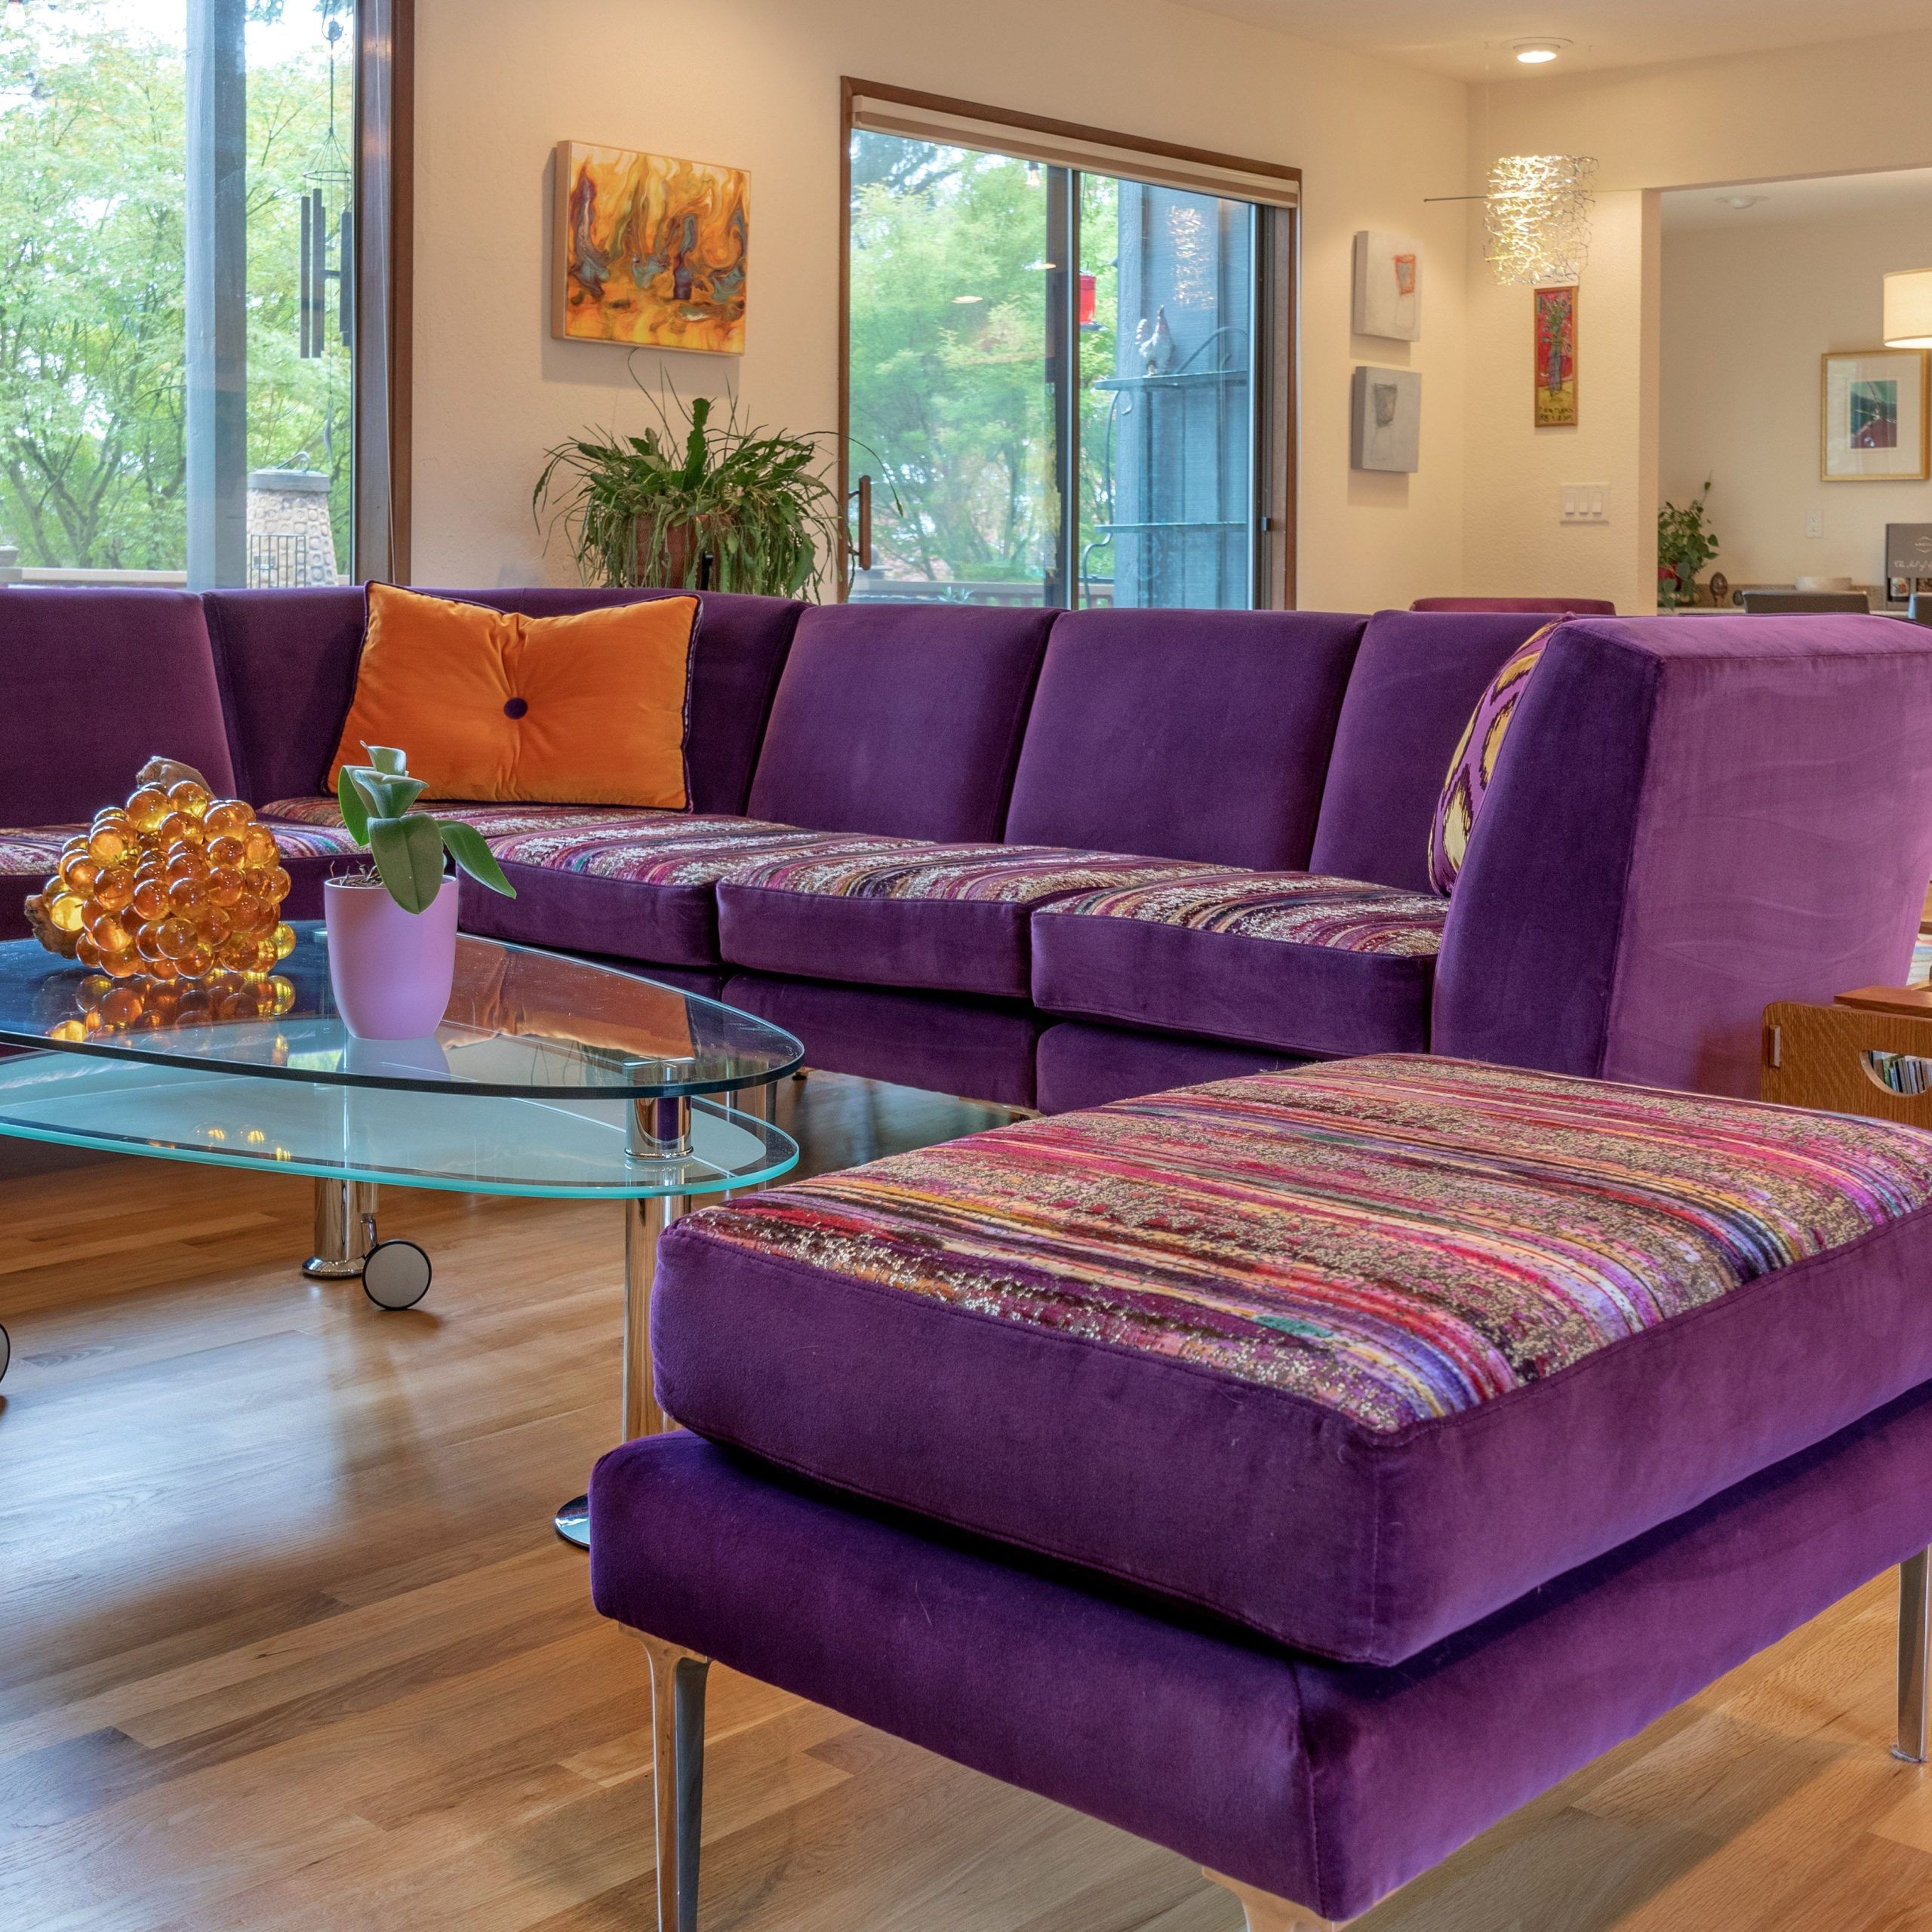 Sw Portland, Or: Modern Living Room With A Vivid Purple Velvet Intended For Modern Velvet Sofa Recliners With Storage (View 4 of 20)